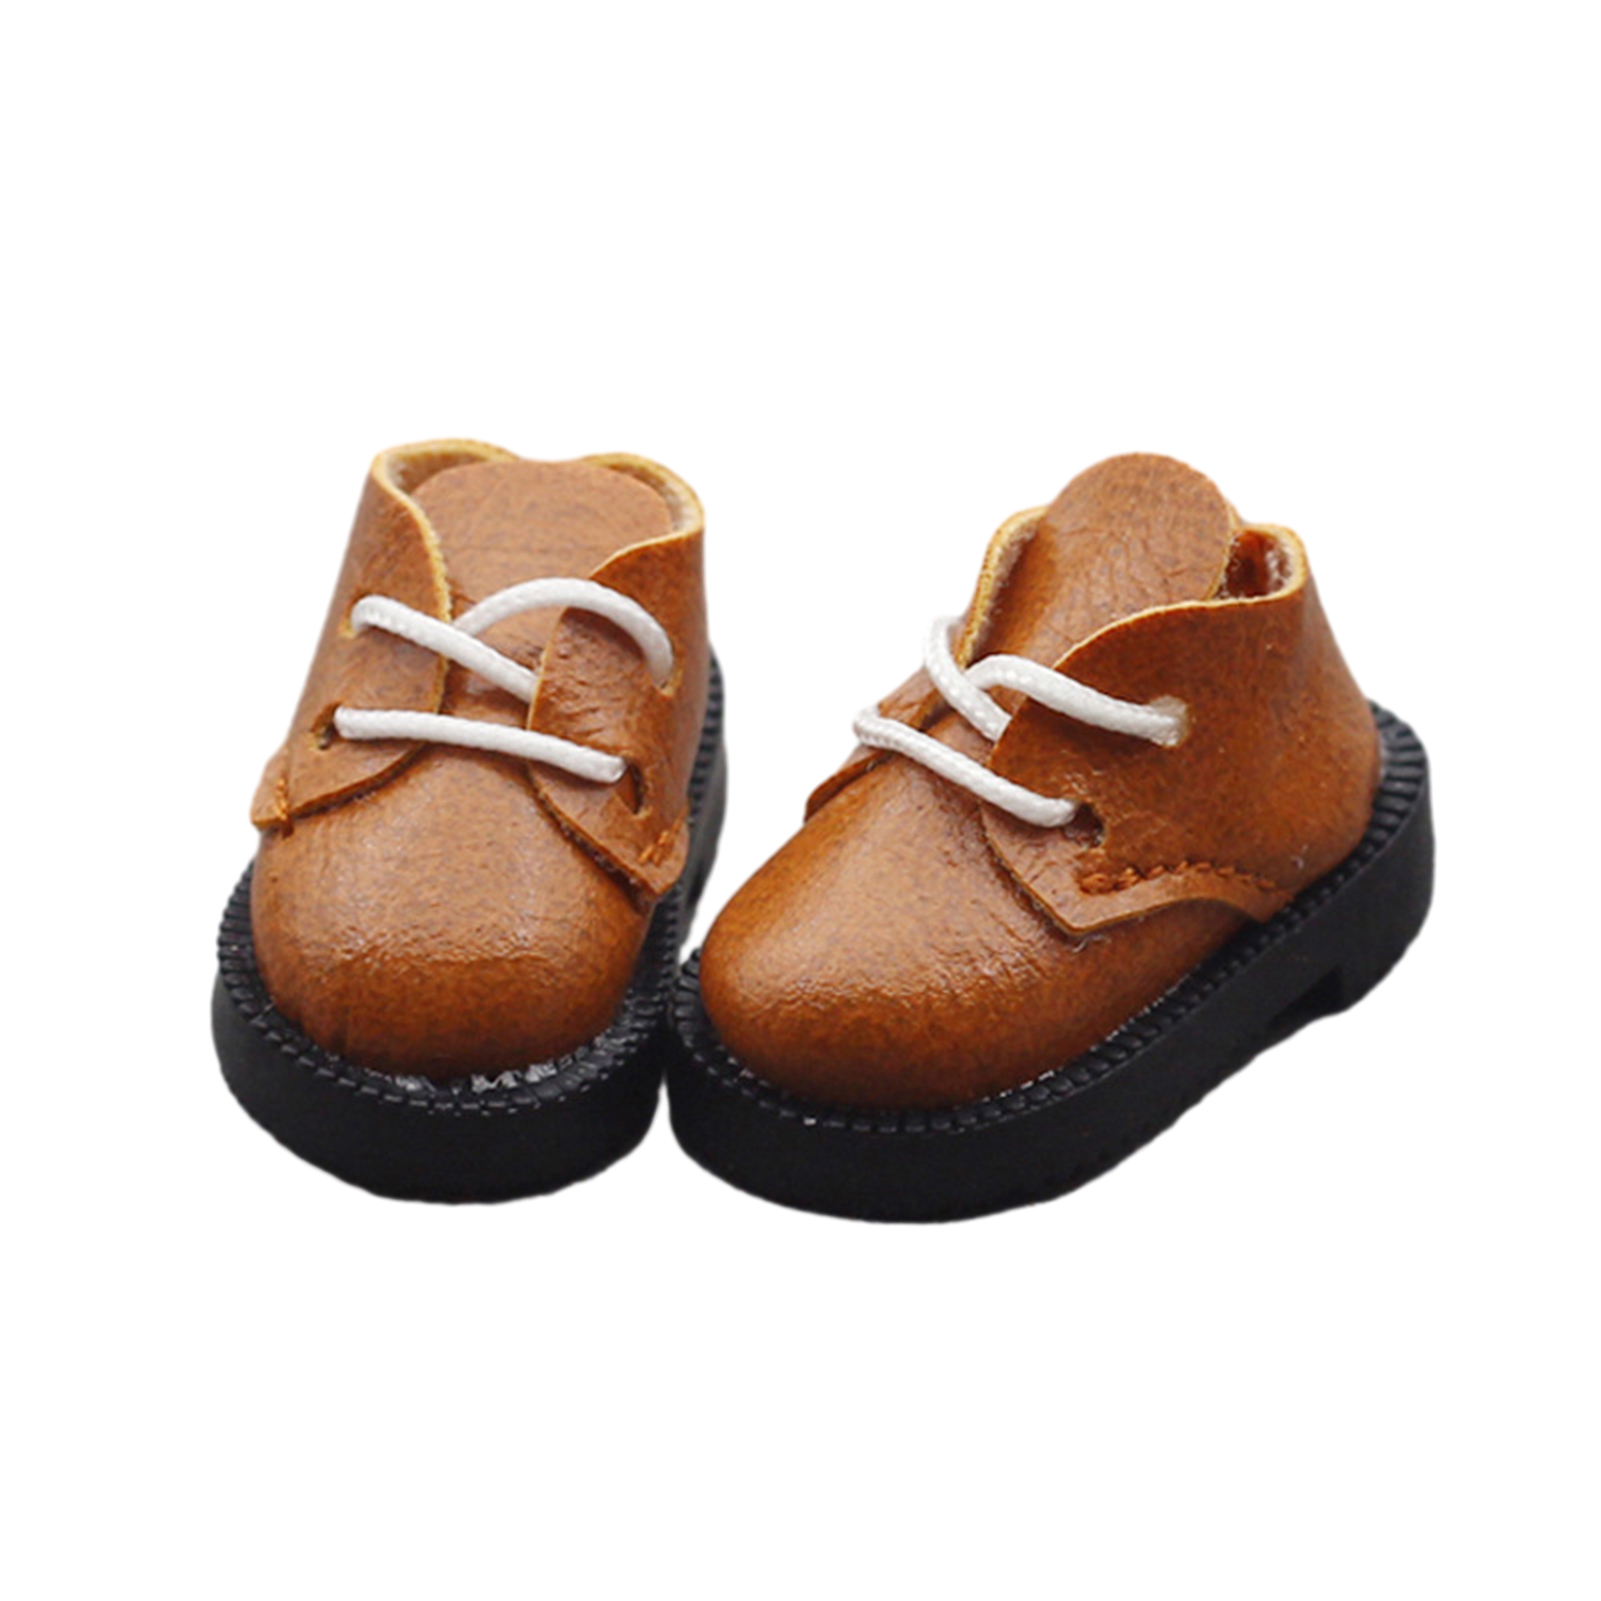 Childrenworld Fashionable Doll Accessories Doll Shoes and Realistic Doll